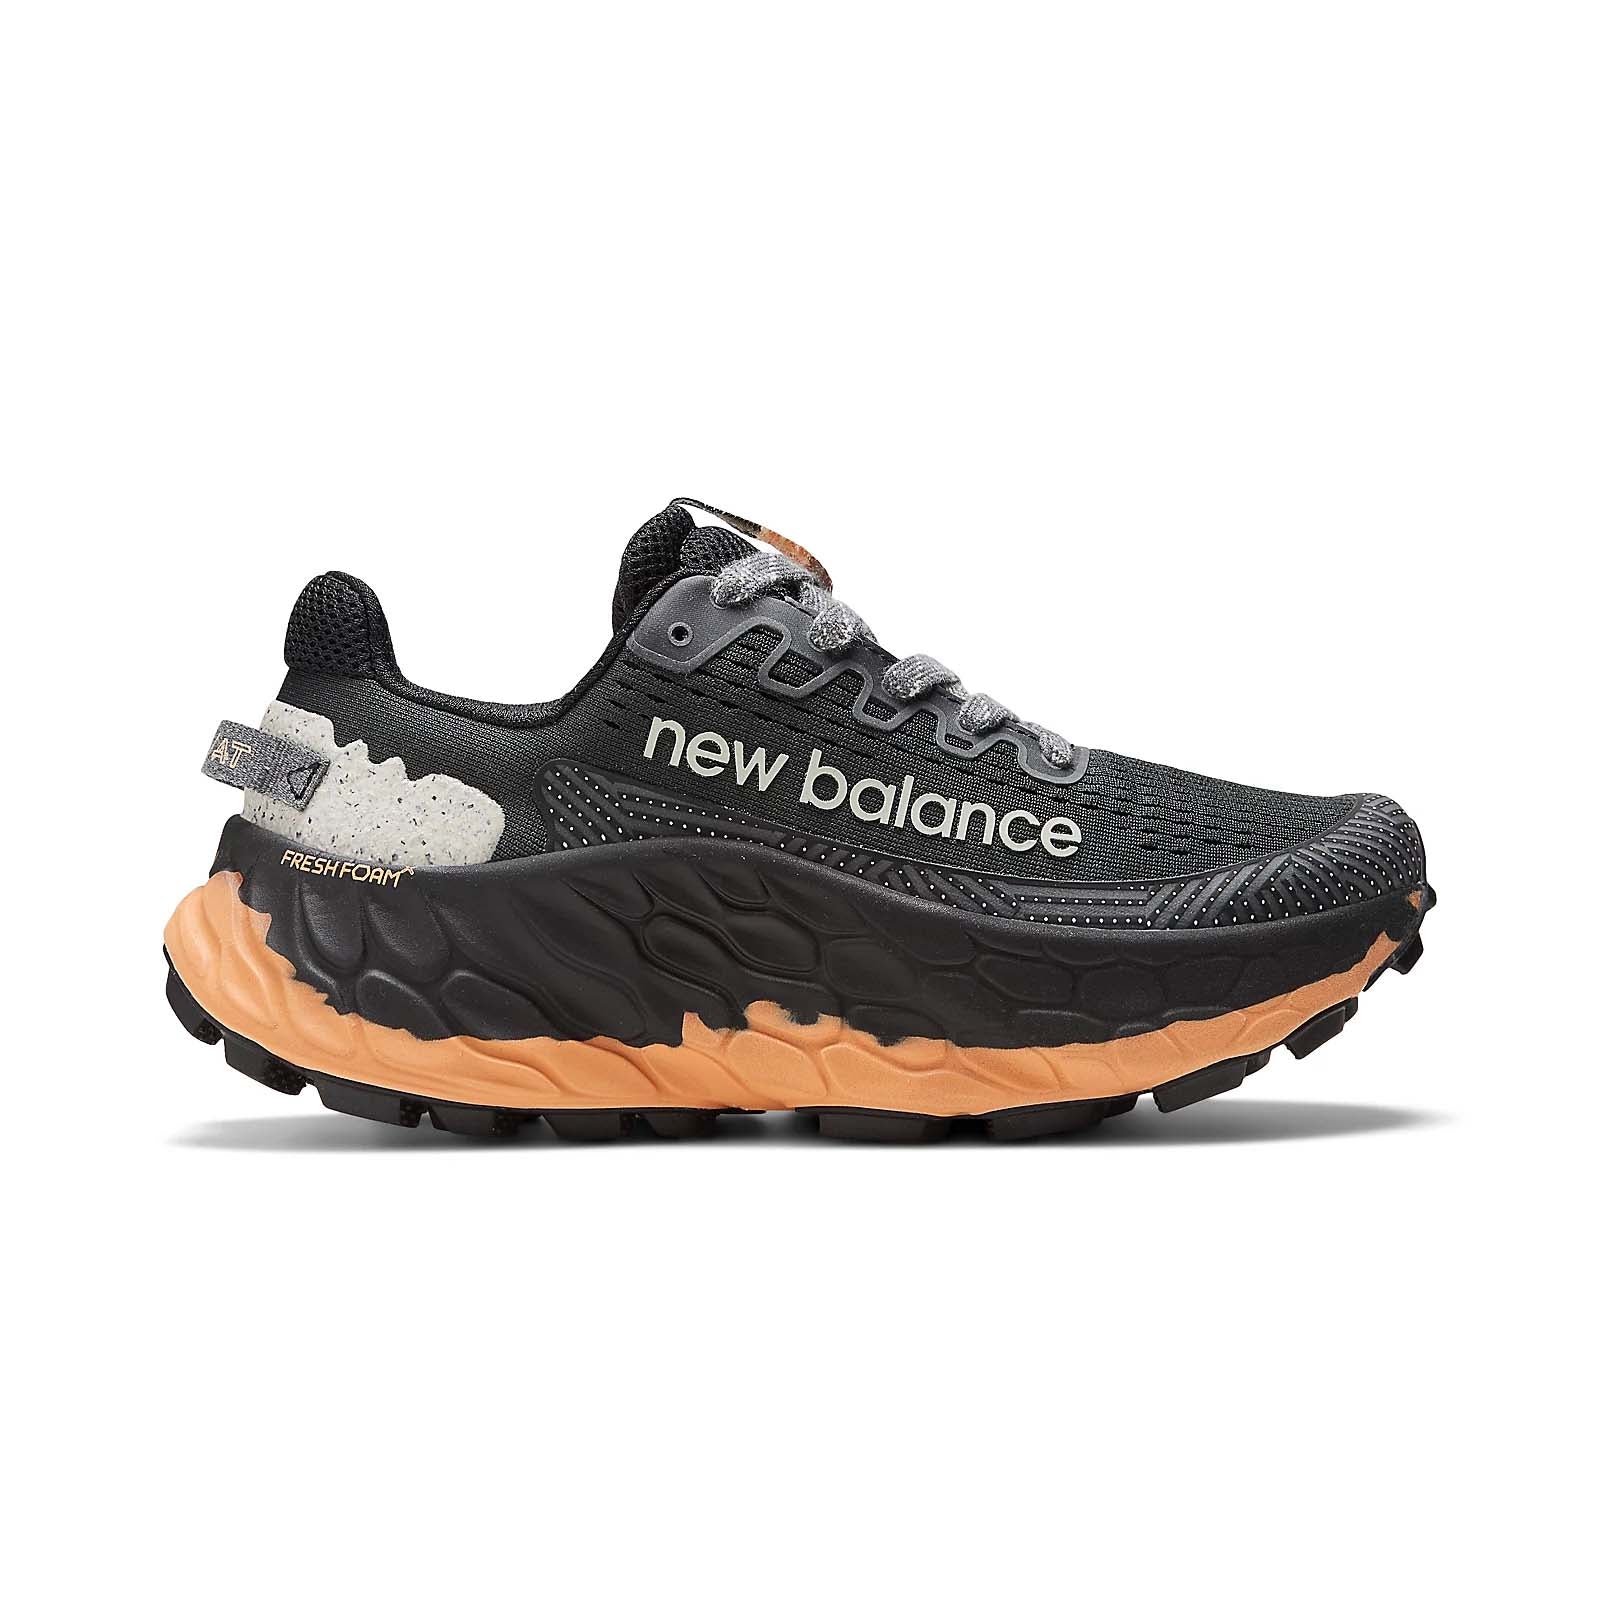 The New Balance Fresh Foam X More v3 Womens Trail Running Trainer side view